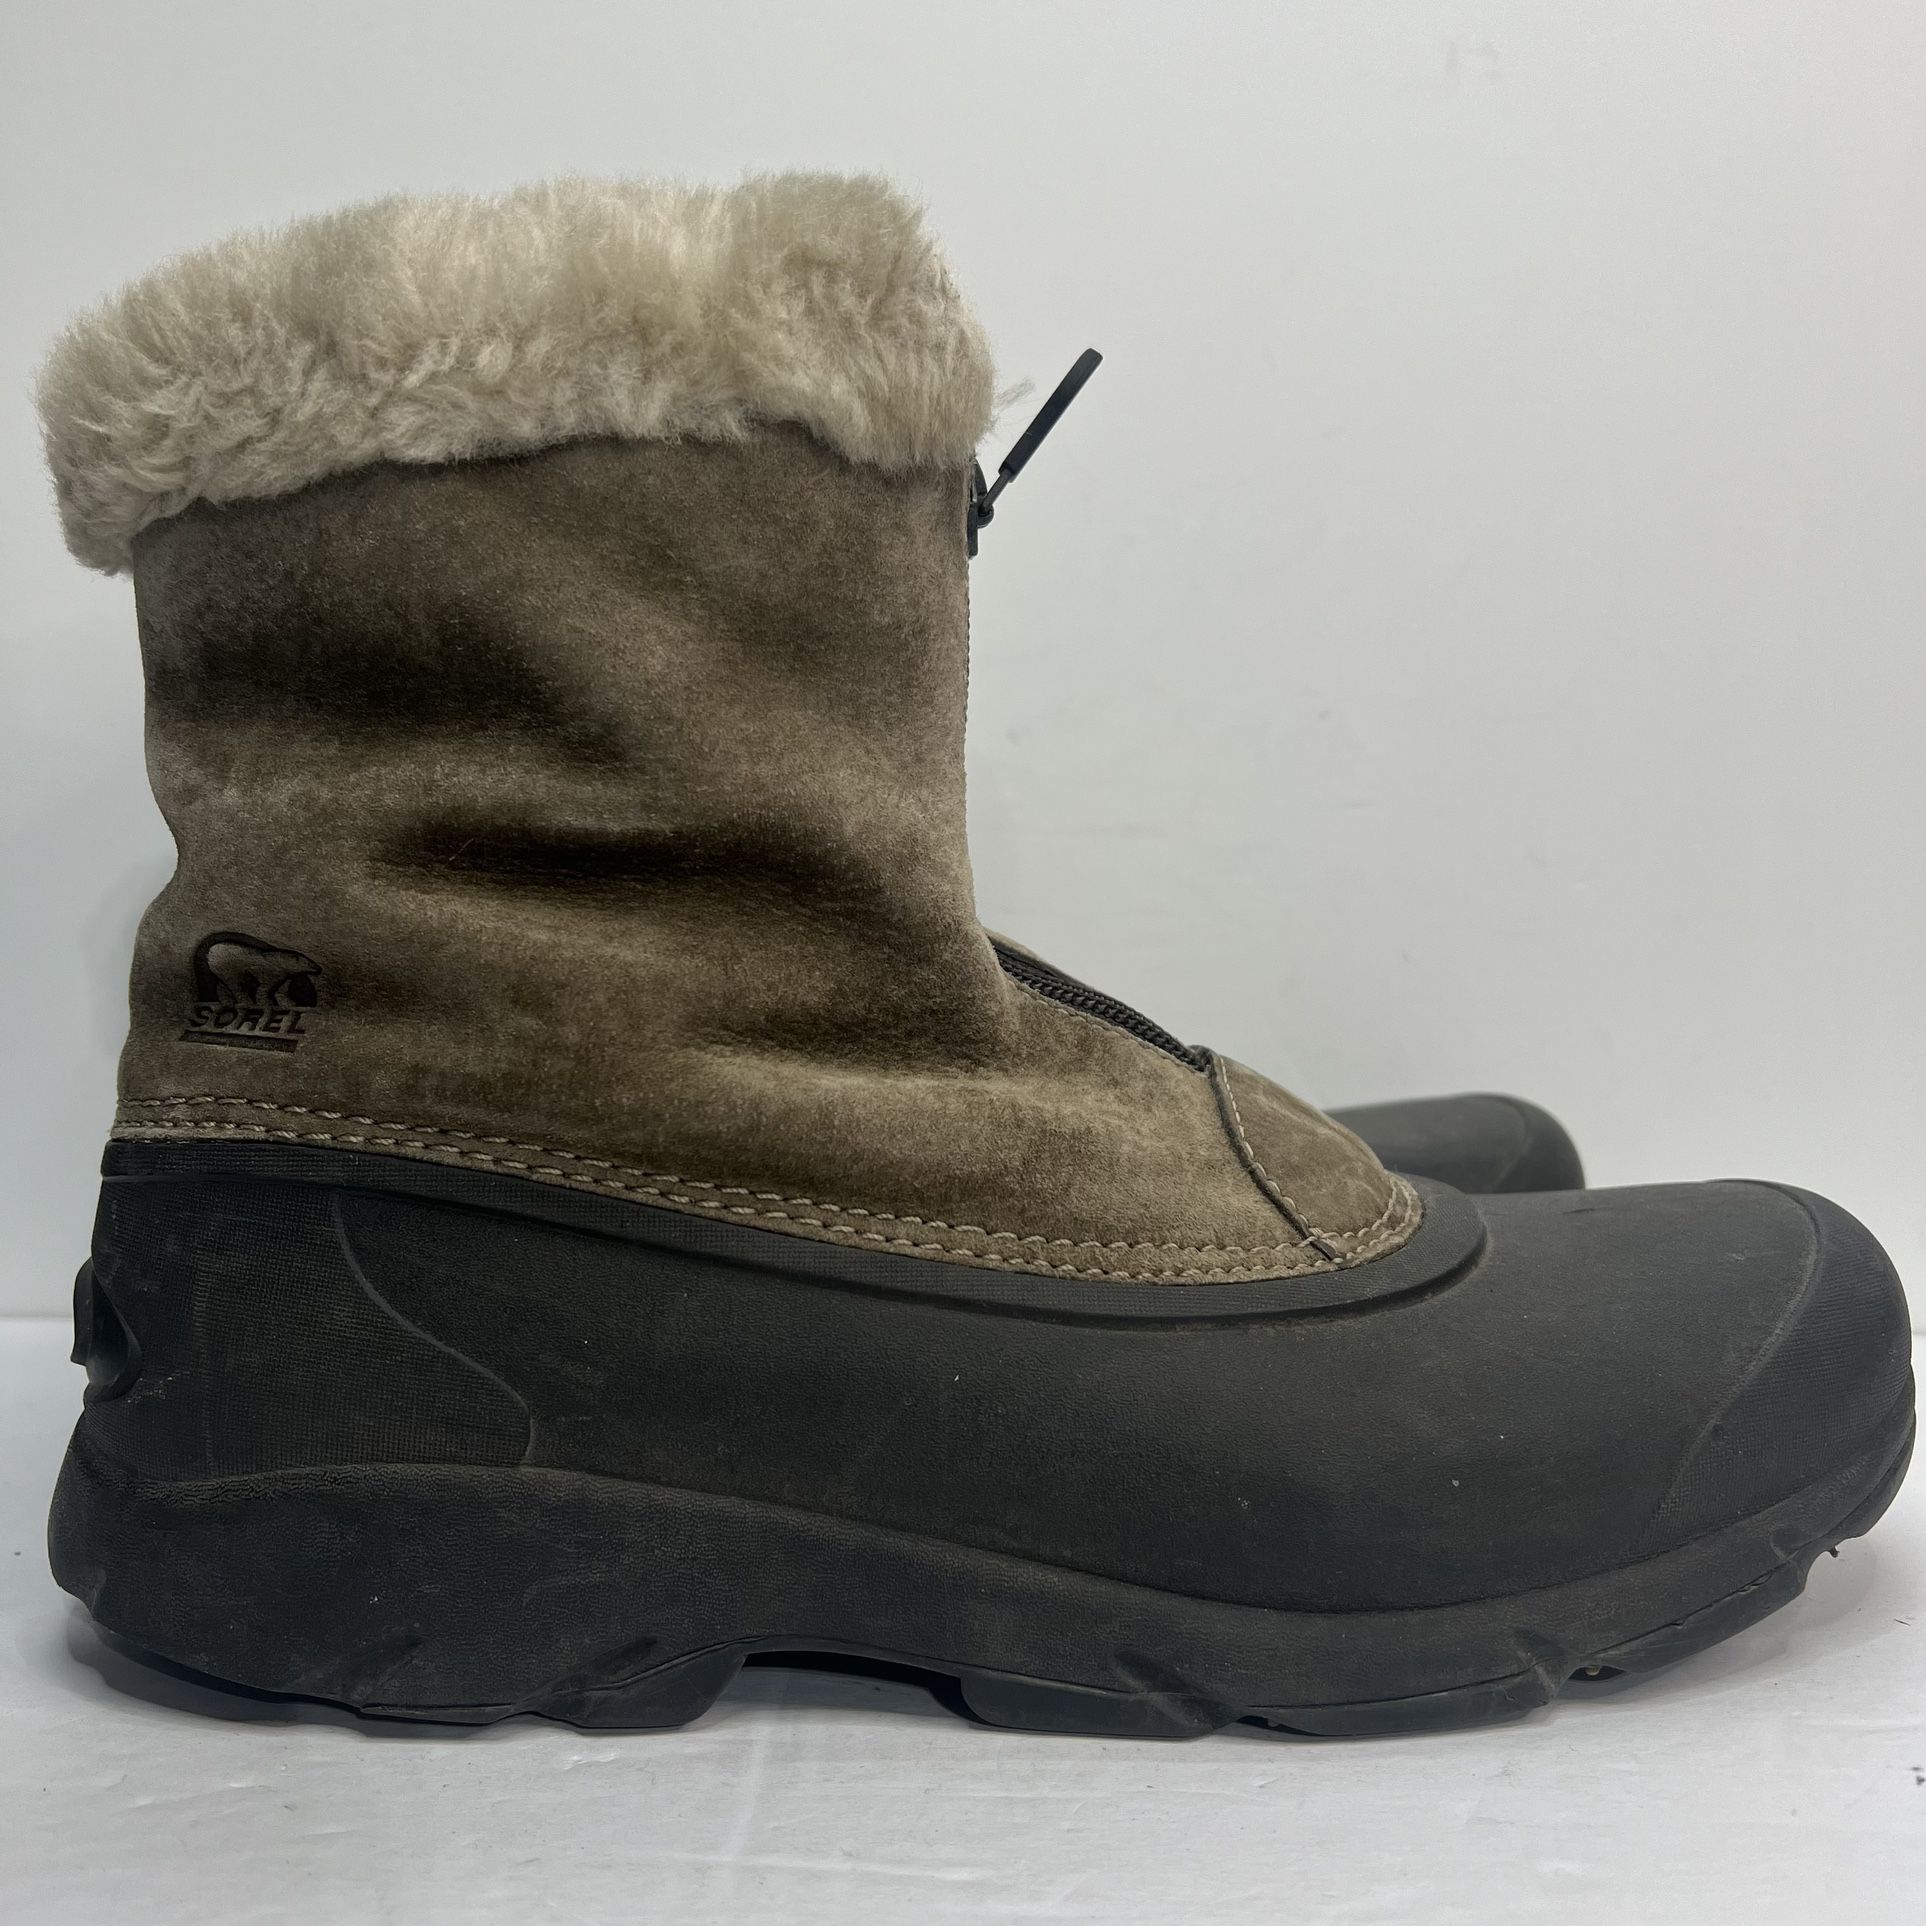 Sorel Snow Angel Zip Thinsulate Lined Snow Boots